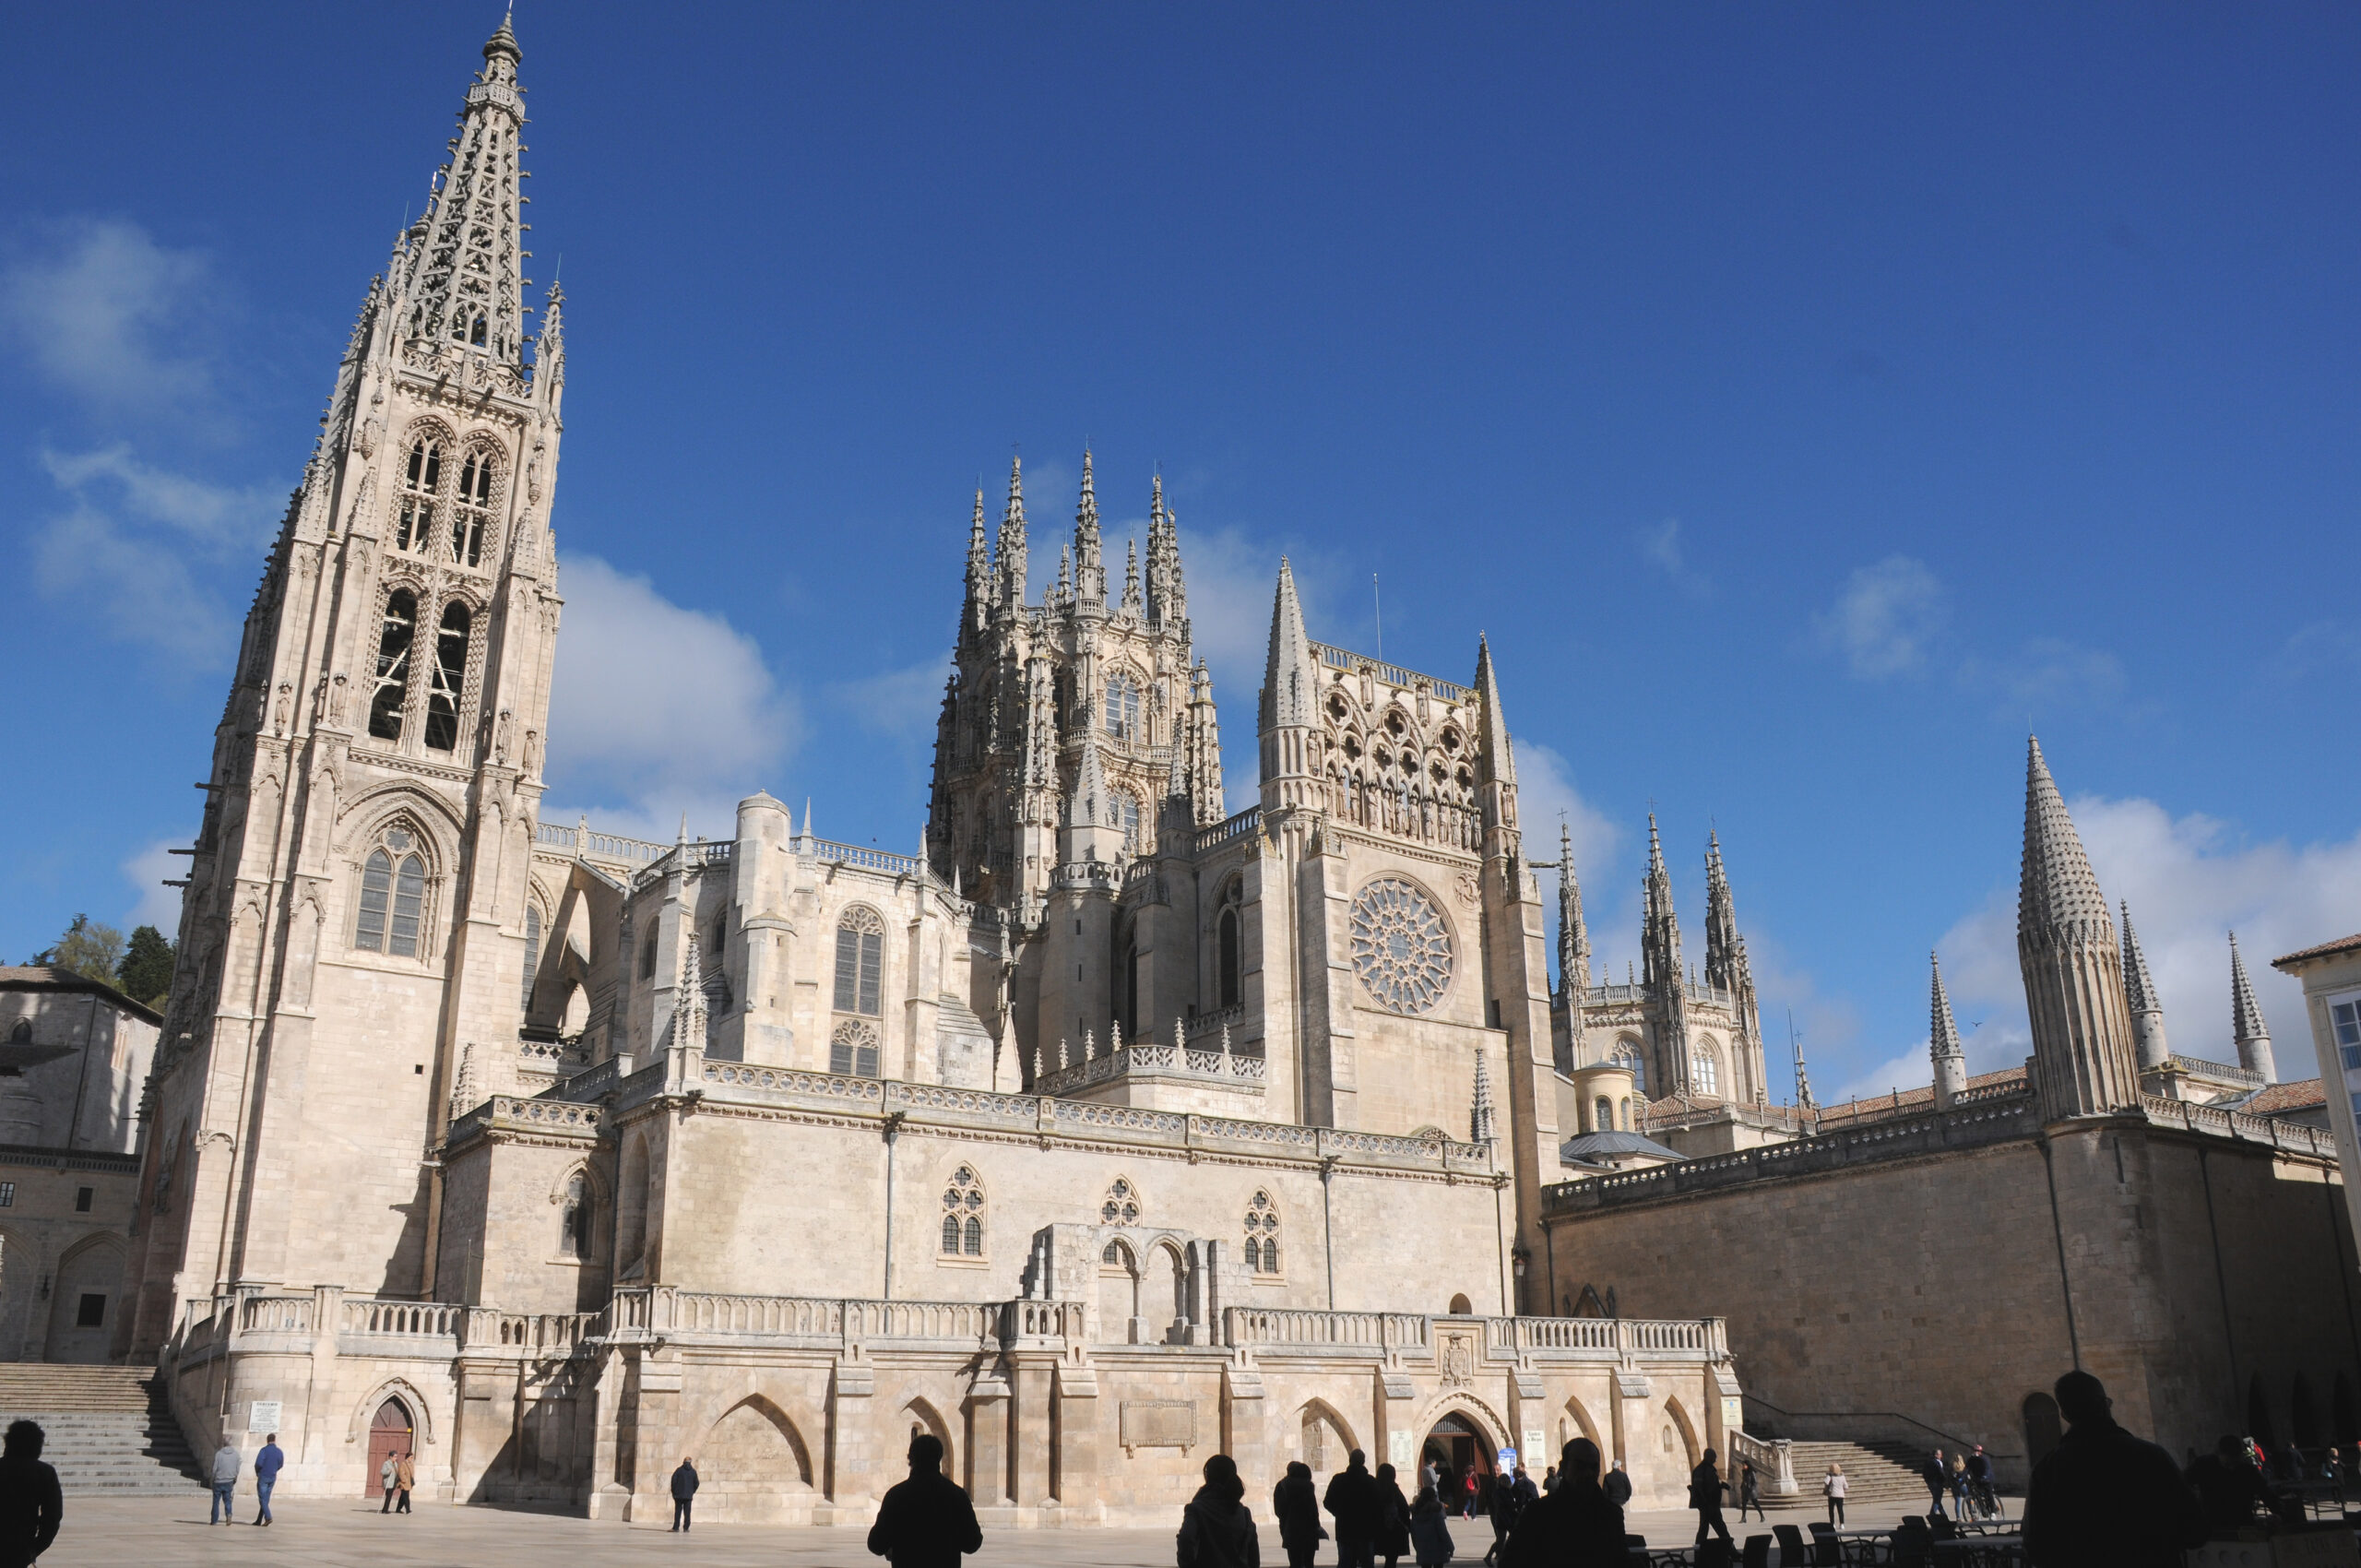 Guided tour of the Burgos Cathedral